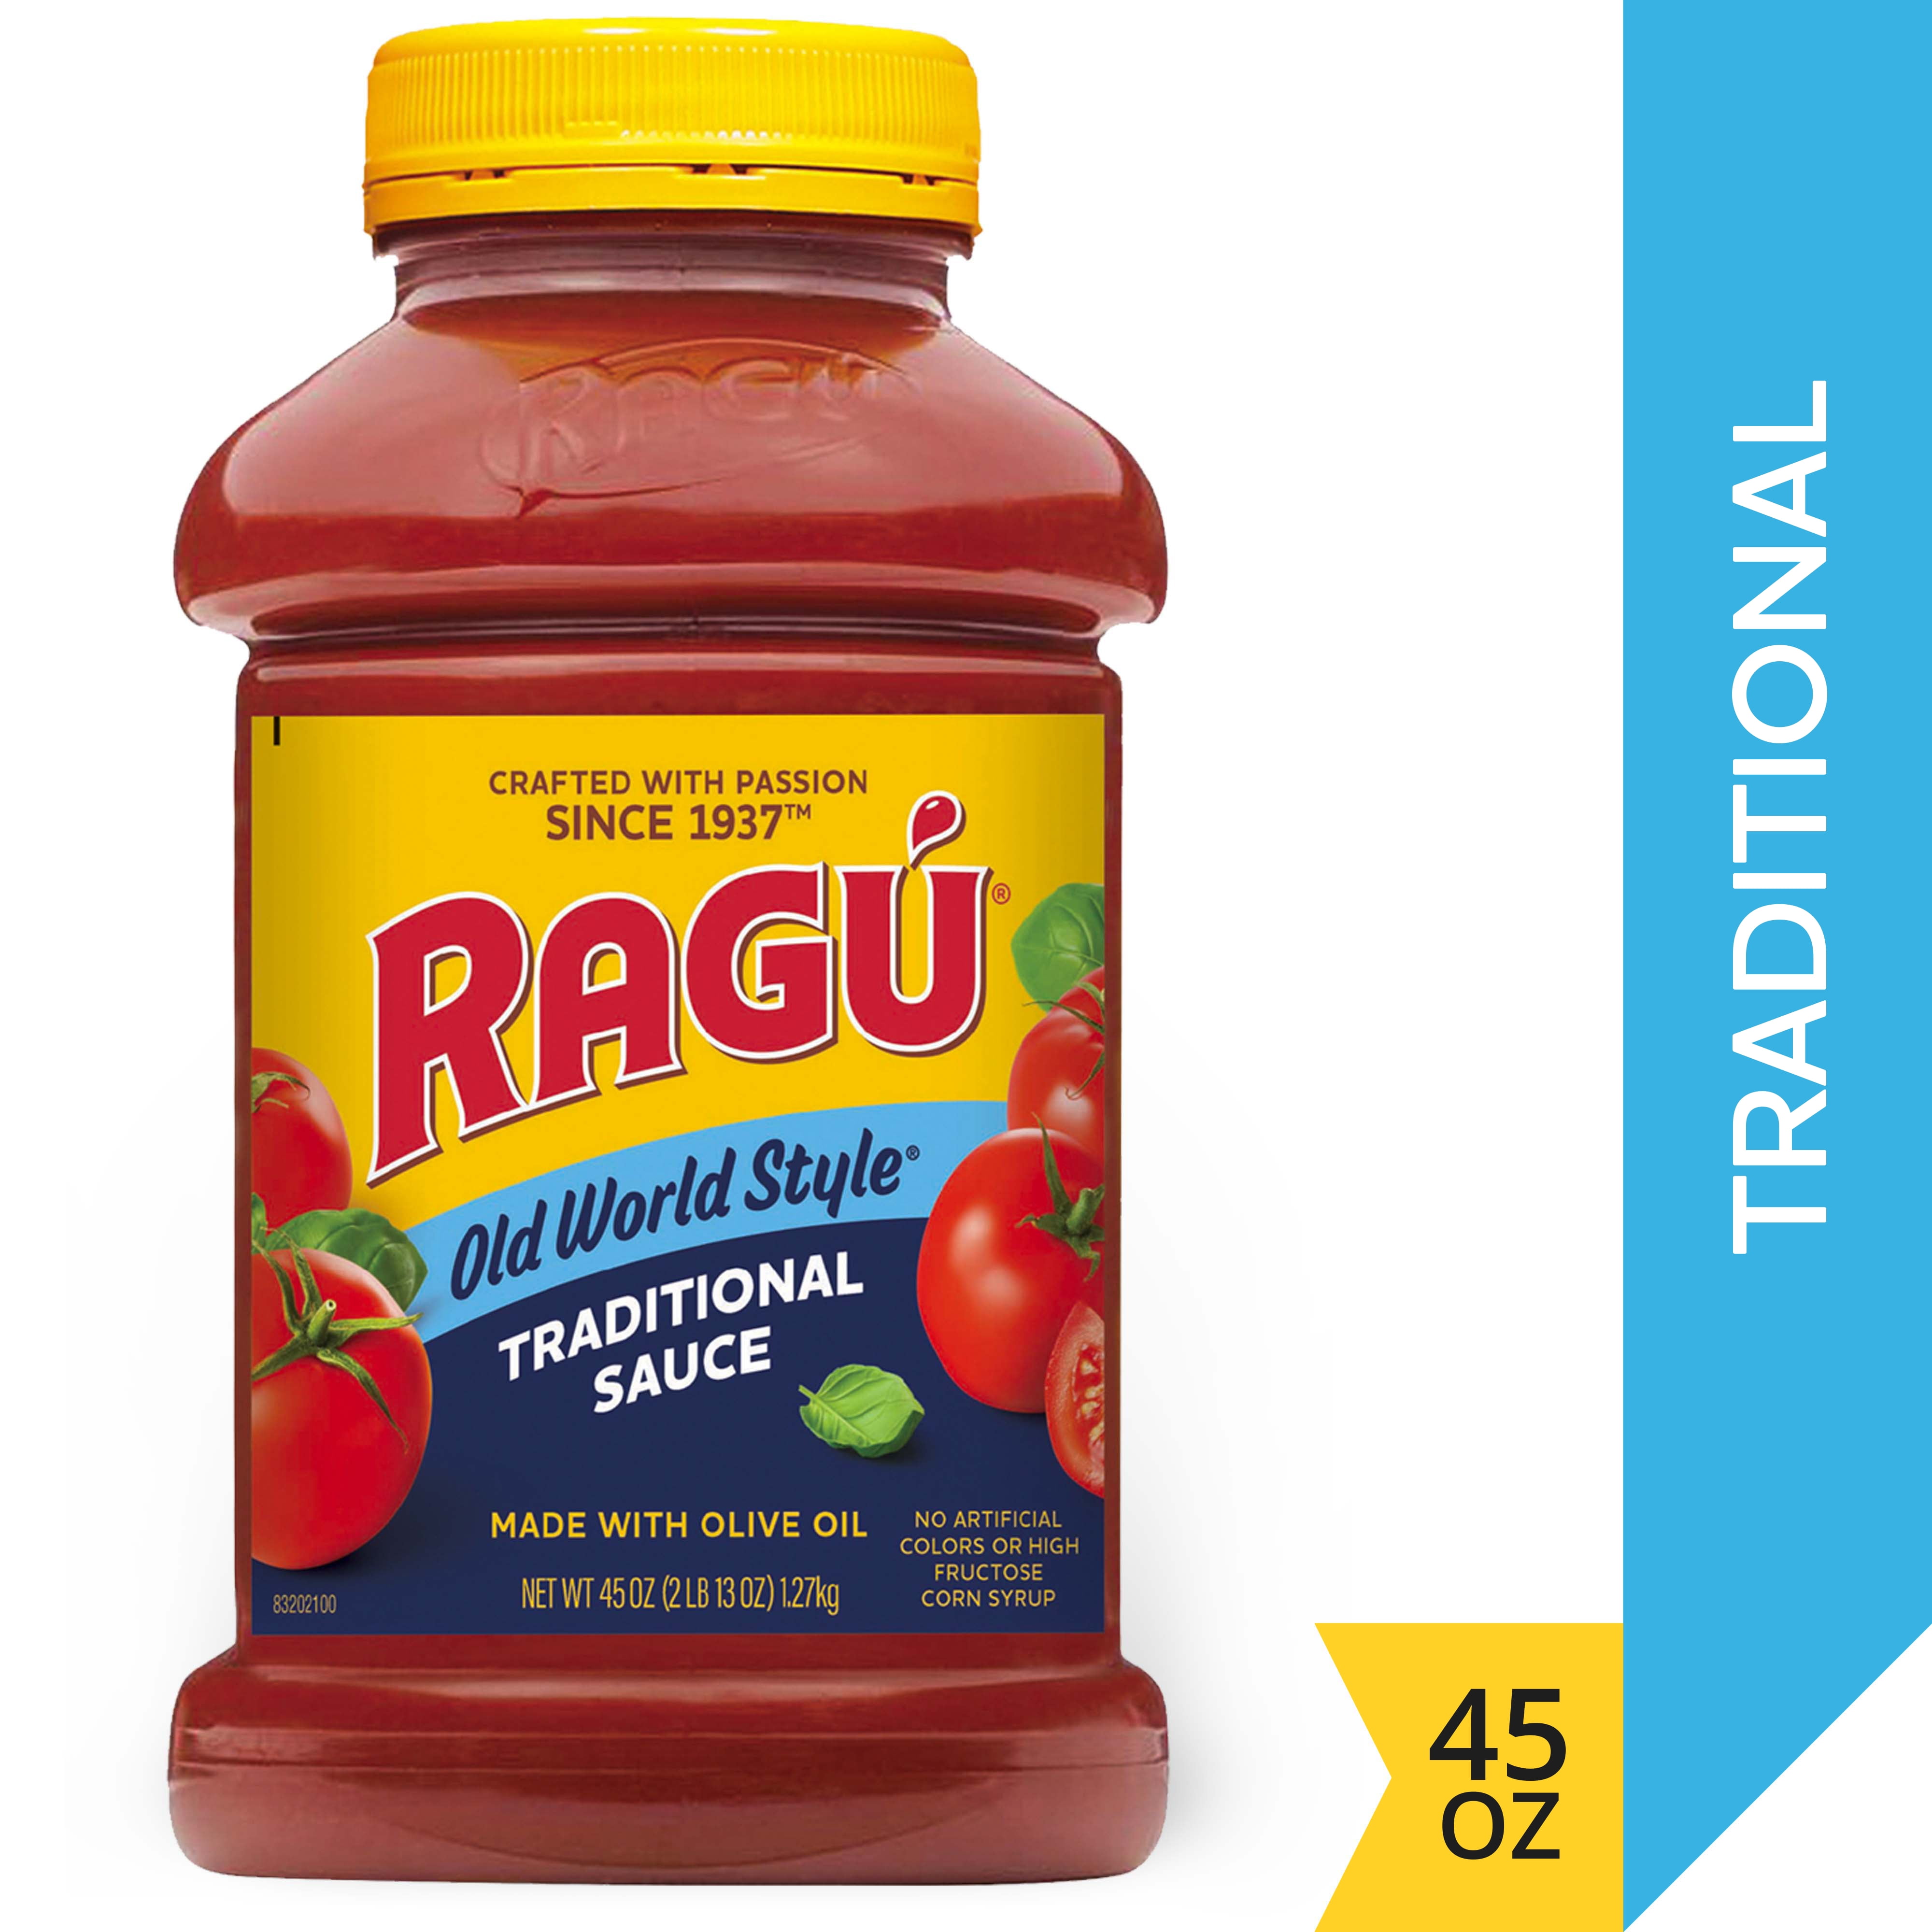 Ragu Old World Style Traditional Sauce, Made with Olive Oil, Perfect for Italian Style Meals at Home, 45 OZ